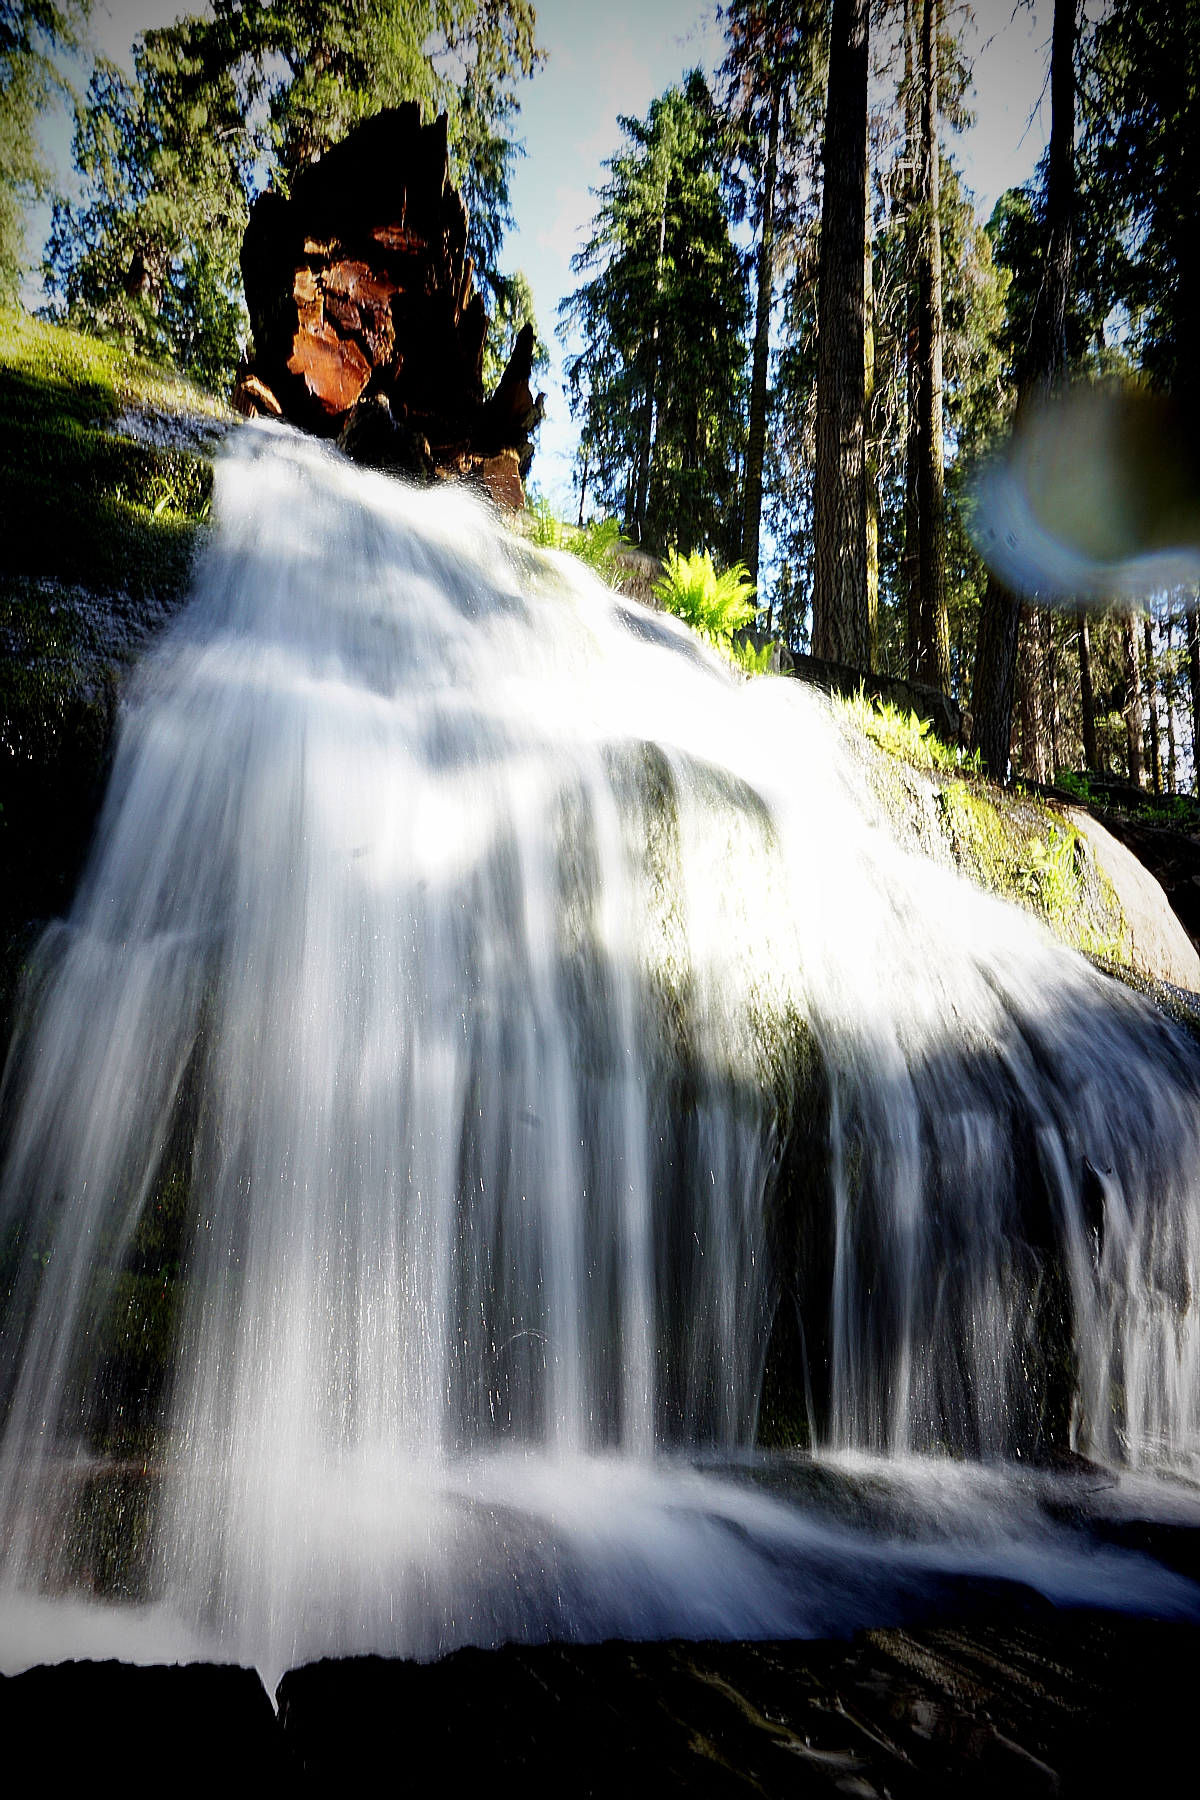 The Sequoia National Park & King's Canyon Travel Guide